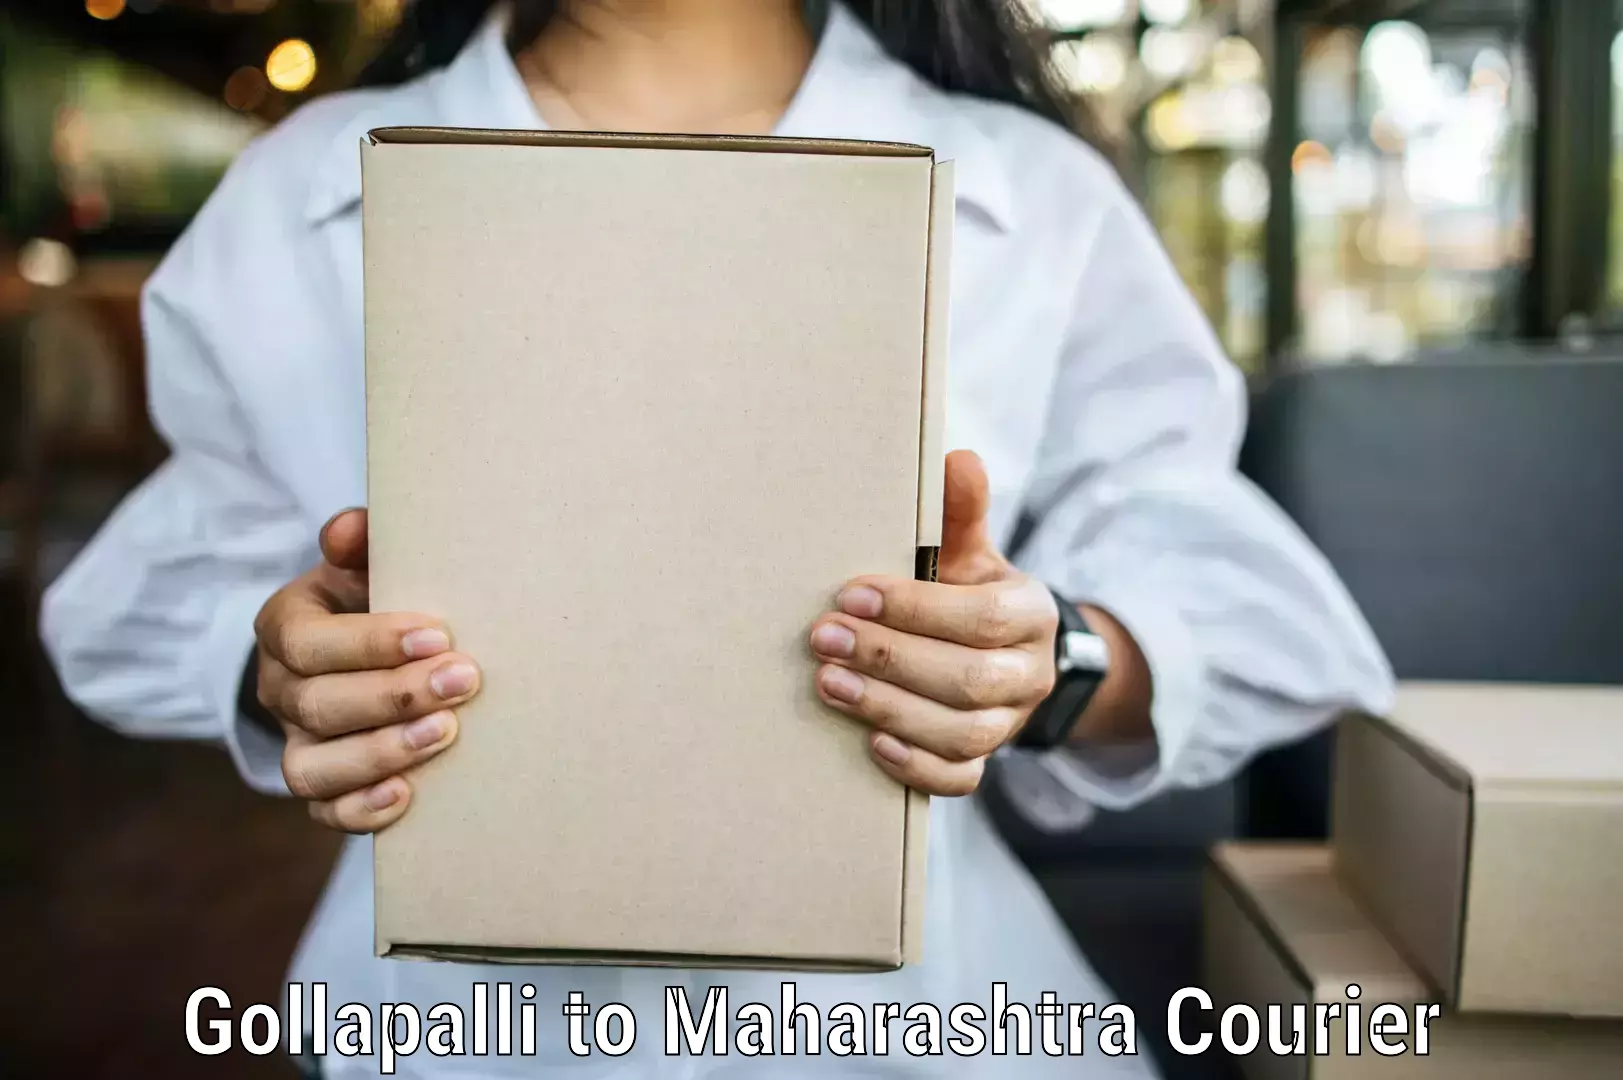 State-of-the-art courier technology Gollapalli to Daryapur